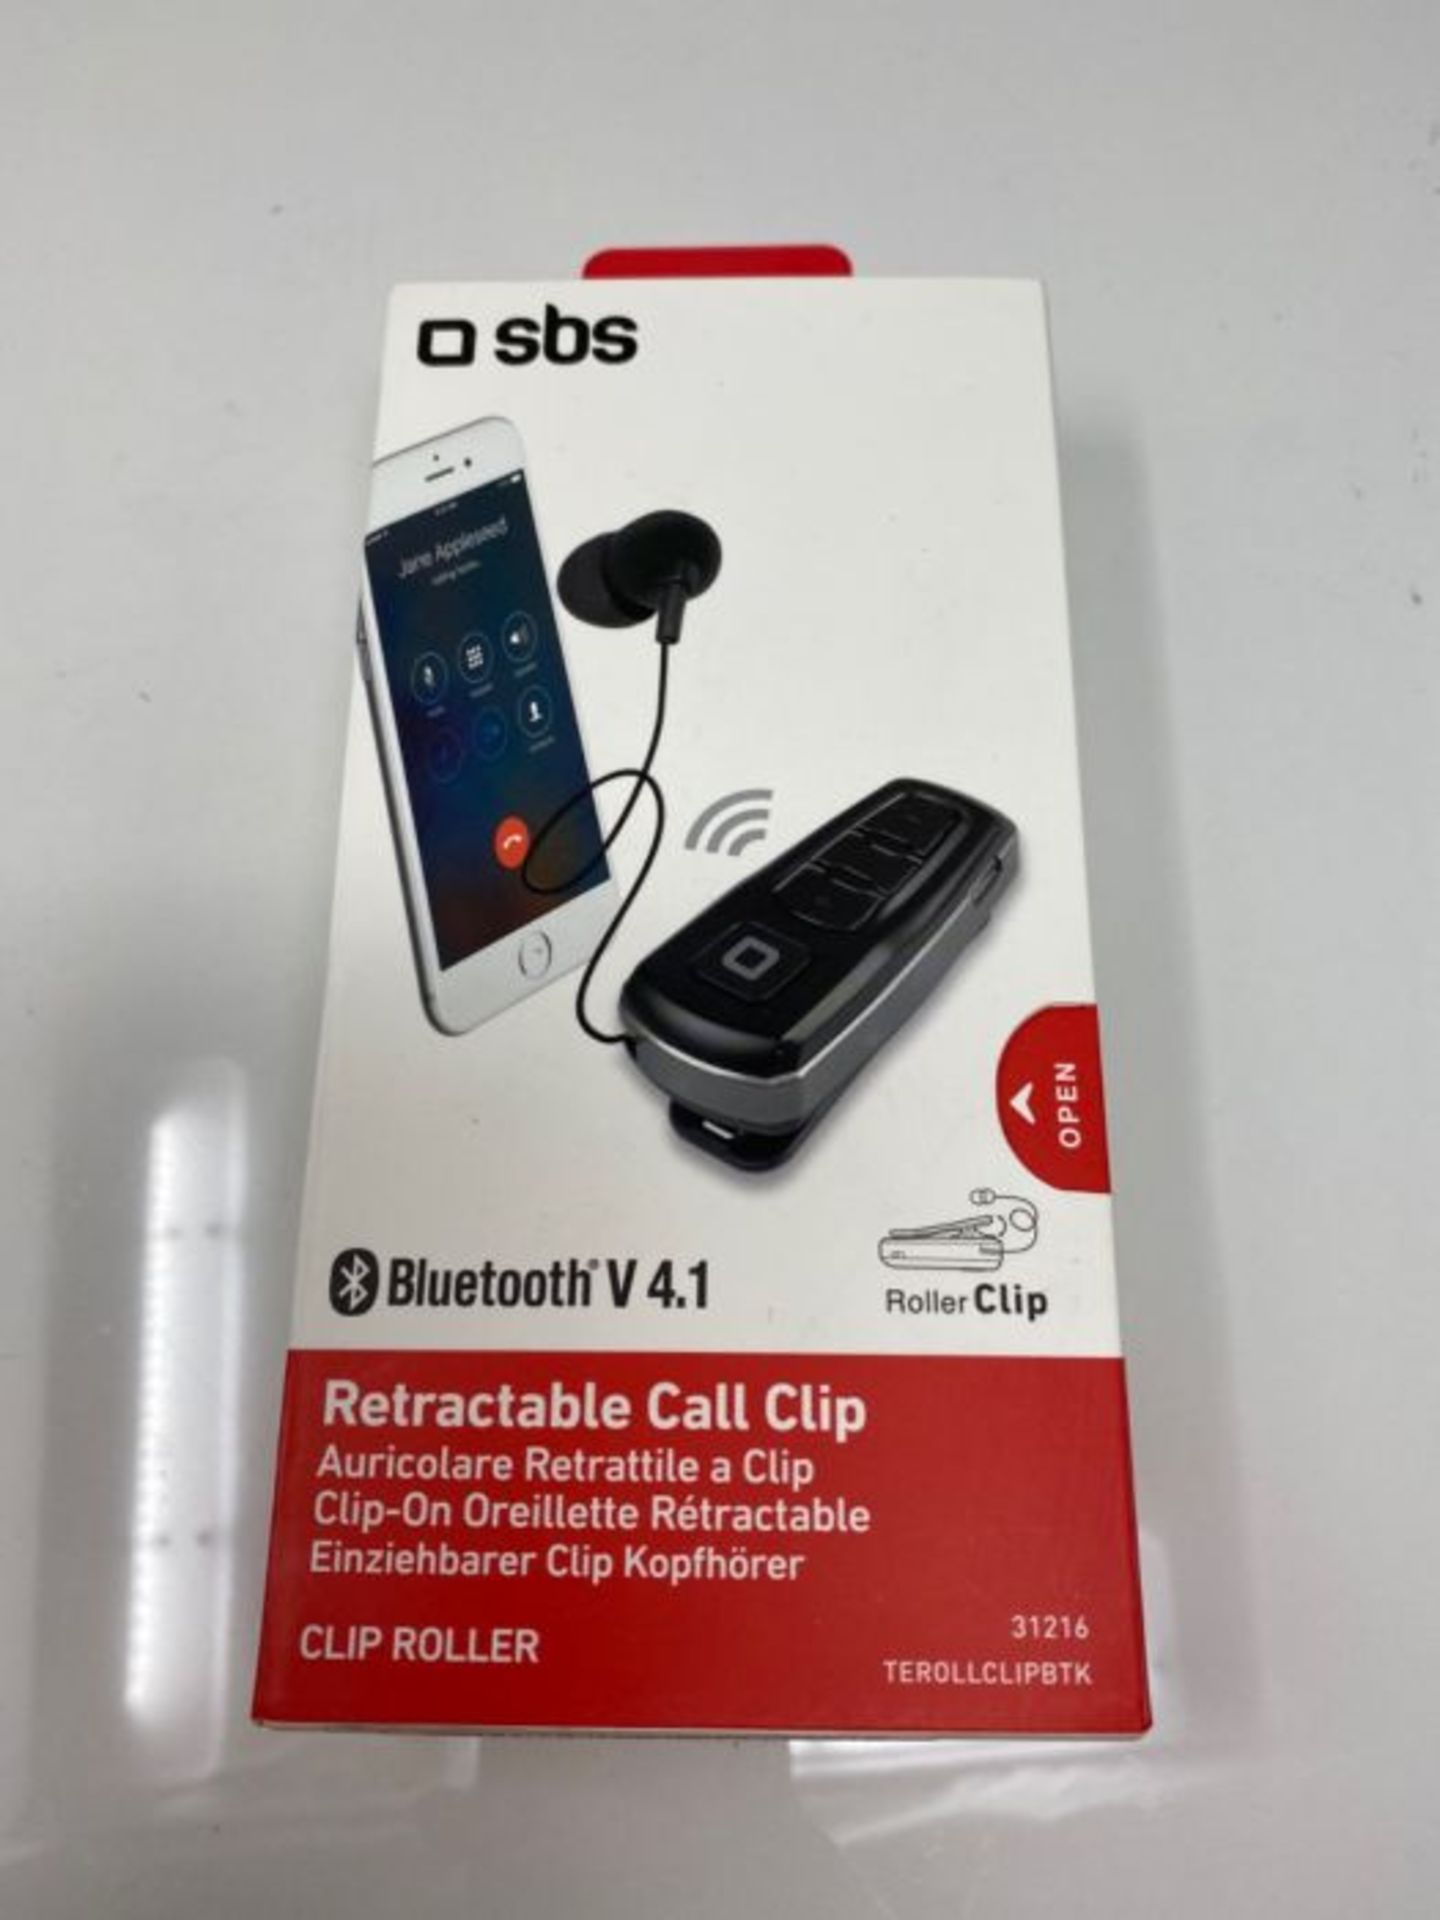 SBS Bluetooth Headset with Clip and Roll-up Wire Multipoint Technology to connect 2 de